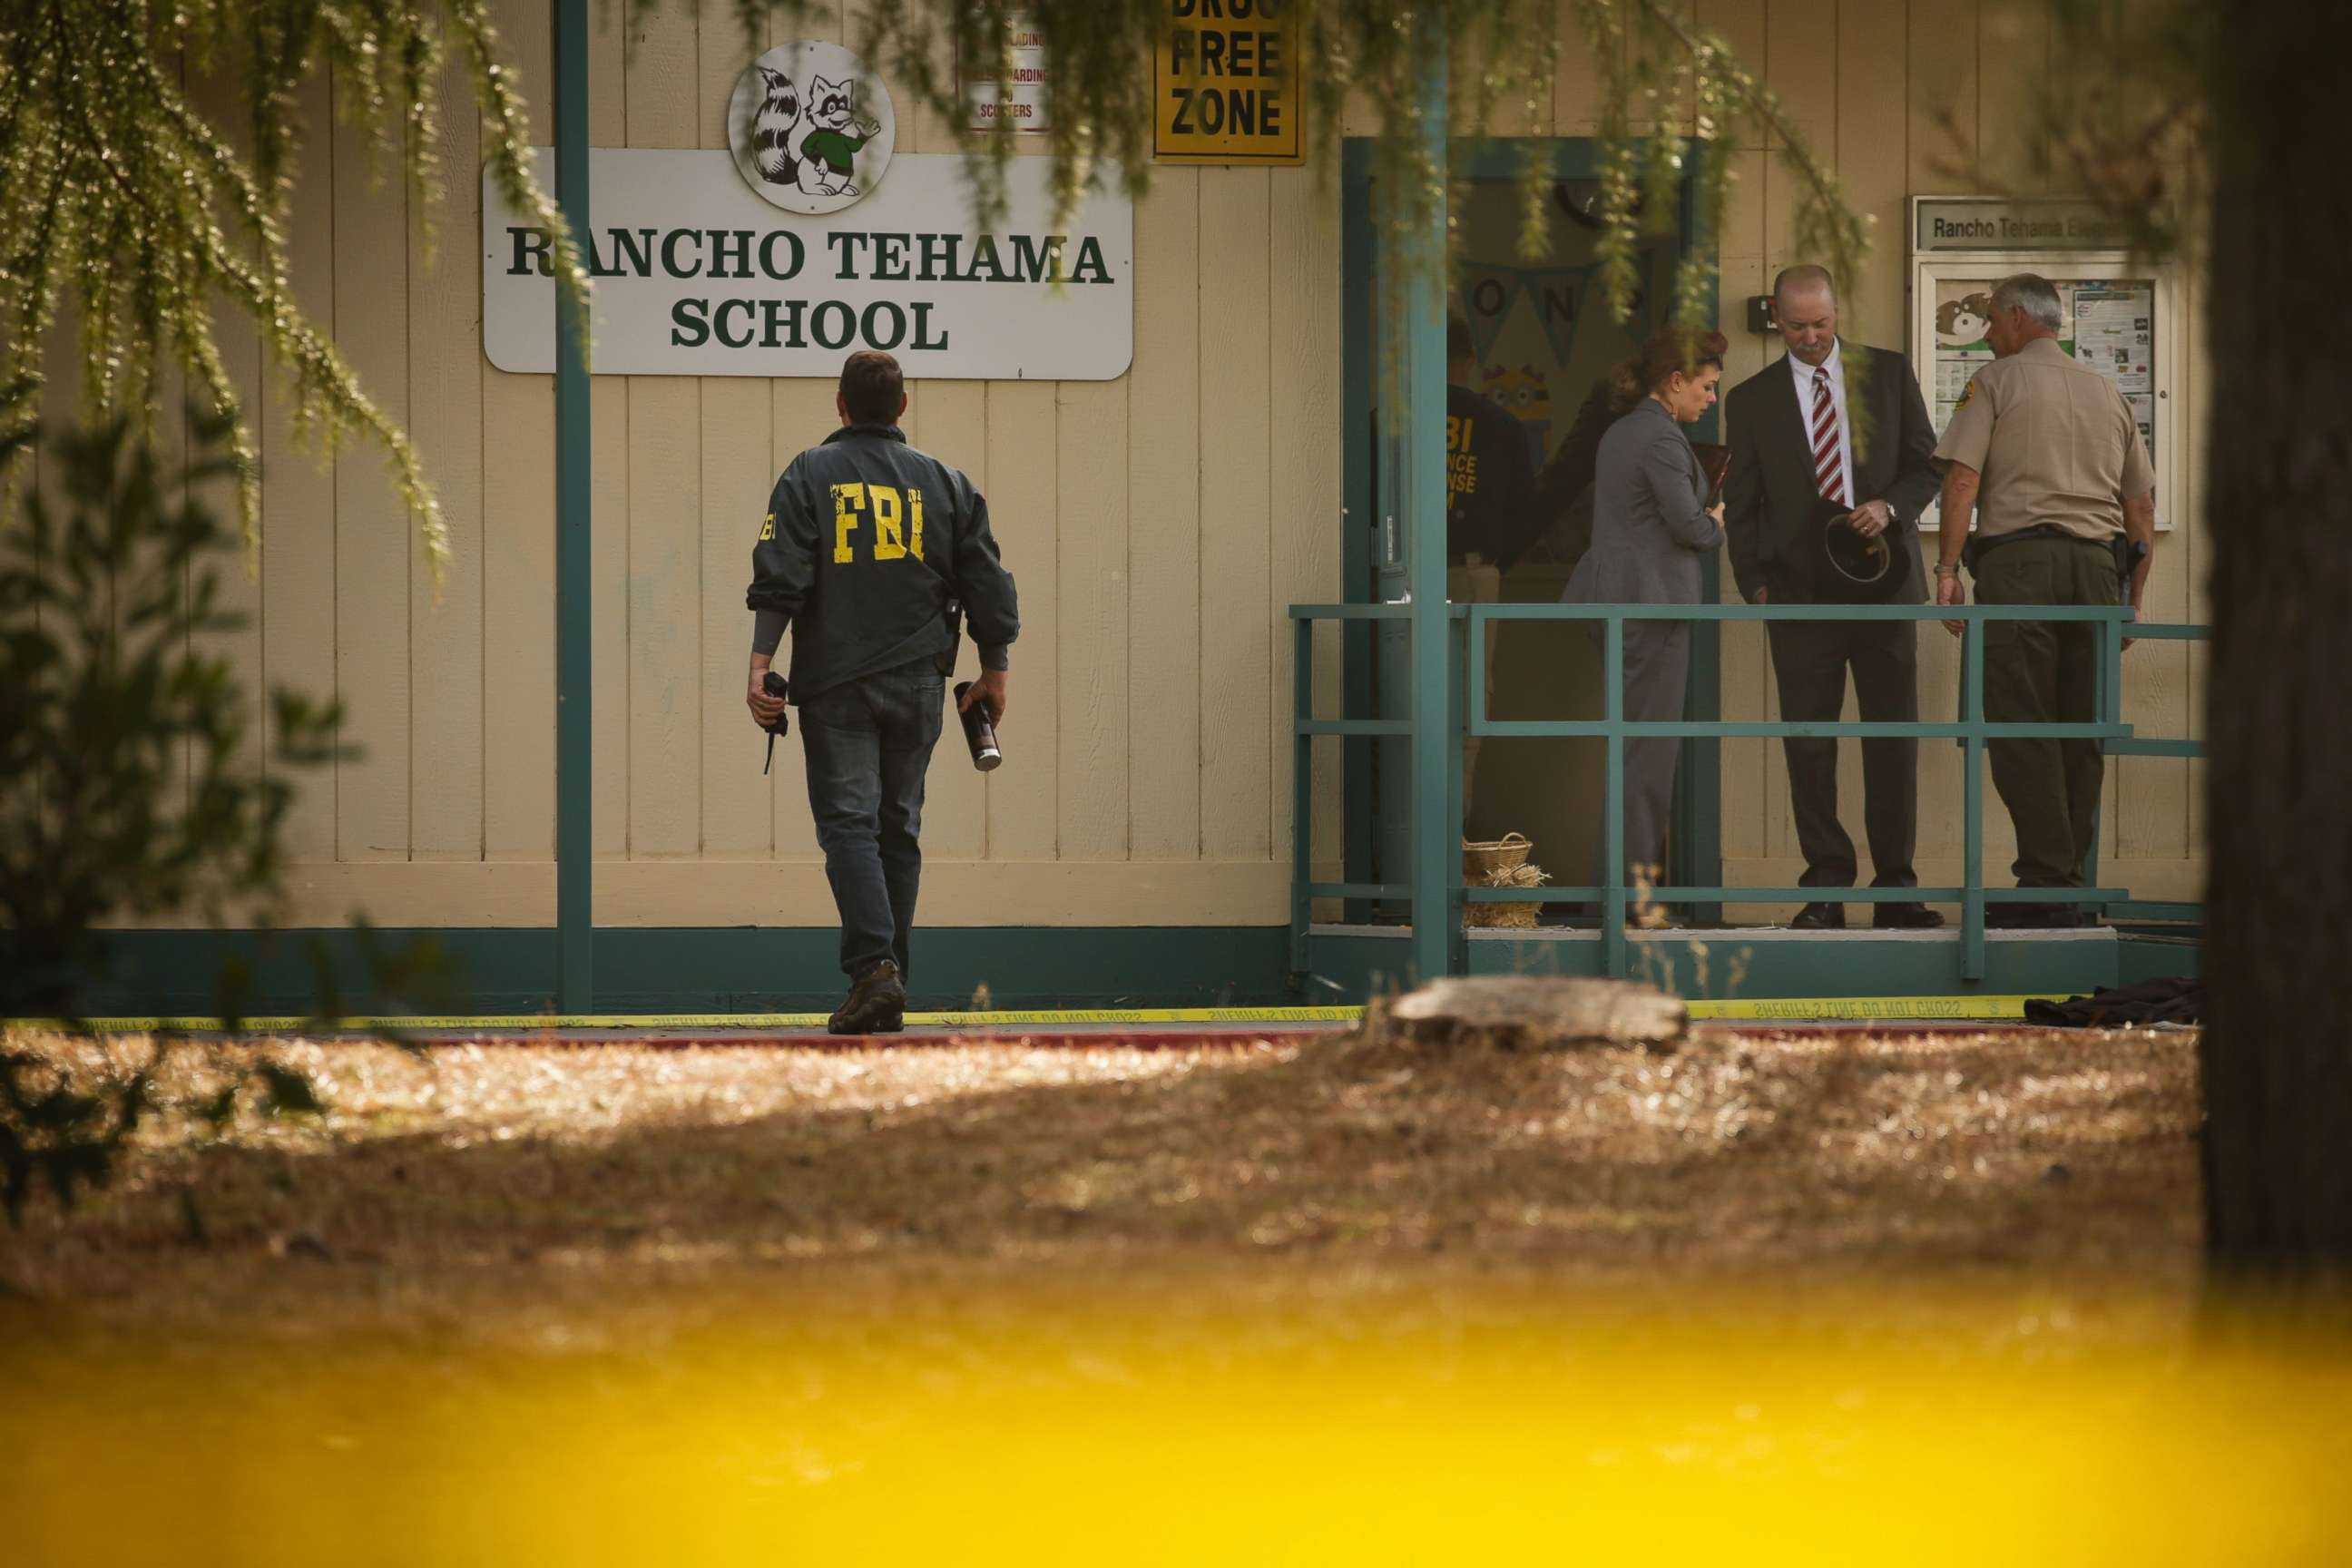 PHOTO: FBI agents are seen behind yellow crime scene tape outside Rancho Tehama Elementary School after a shooting in the morning on Nov. 14, 2017, in Rancho Tehama, Calif.